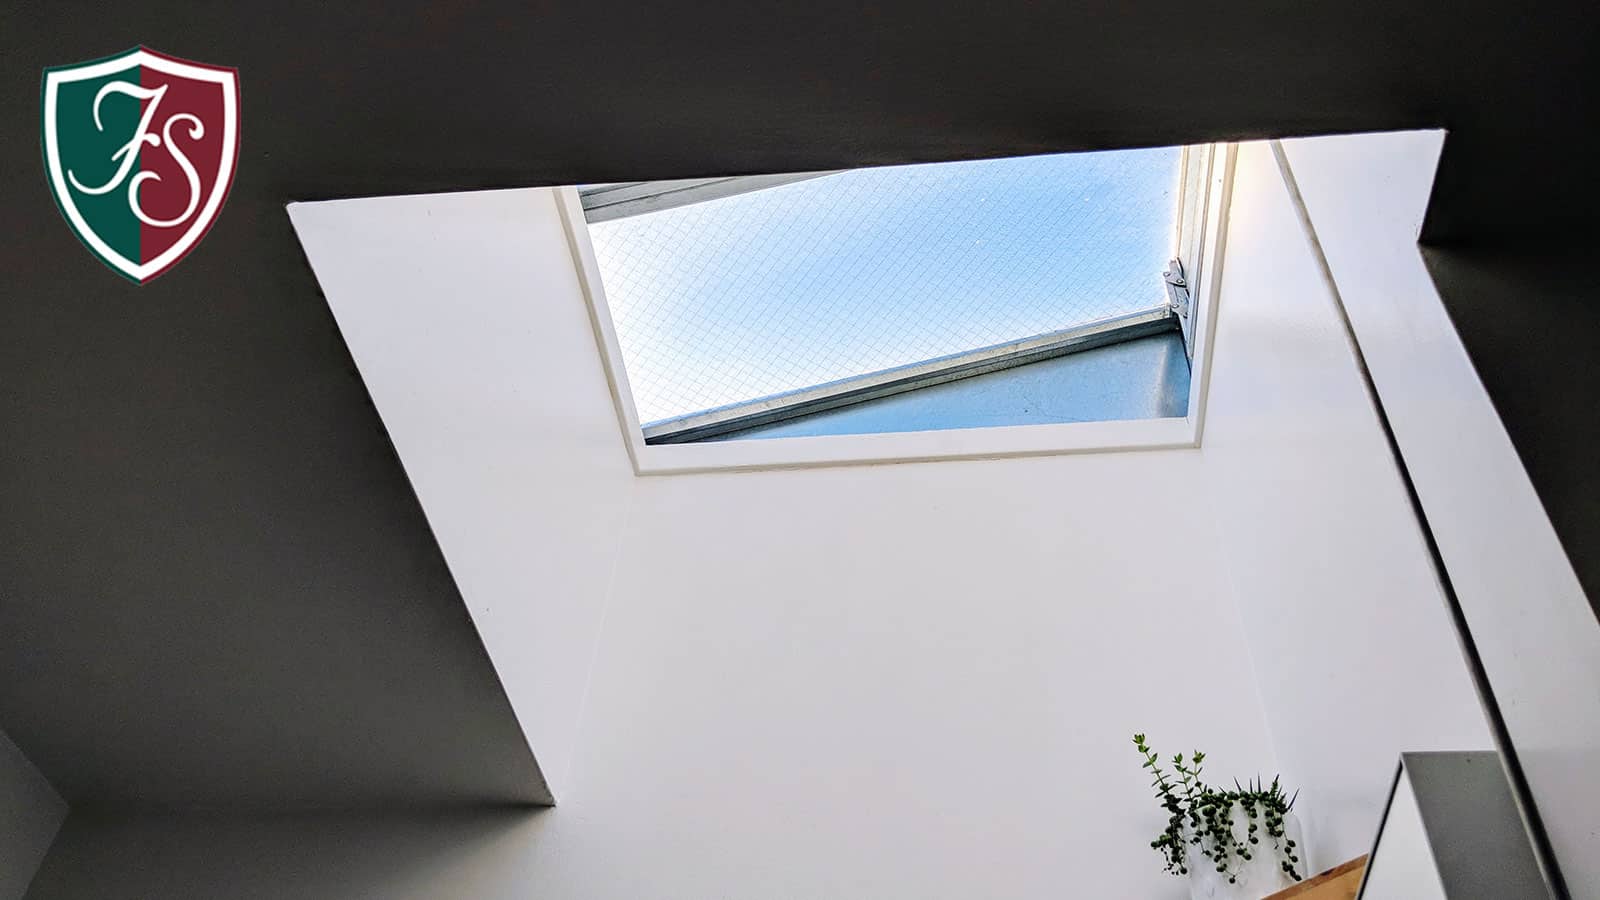 Skylights can be a beautiful, functional addition to your home, but you need to consider several factors before installing a skylight.